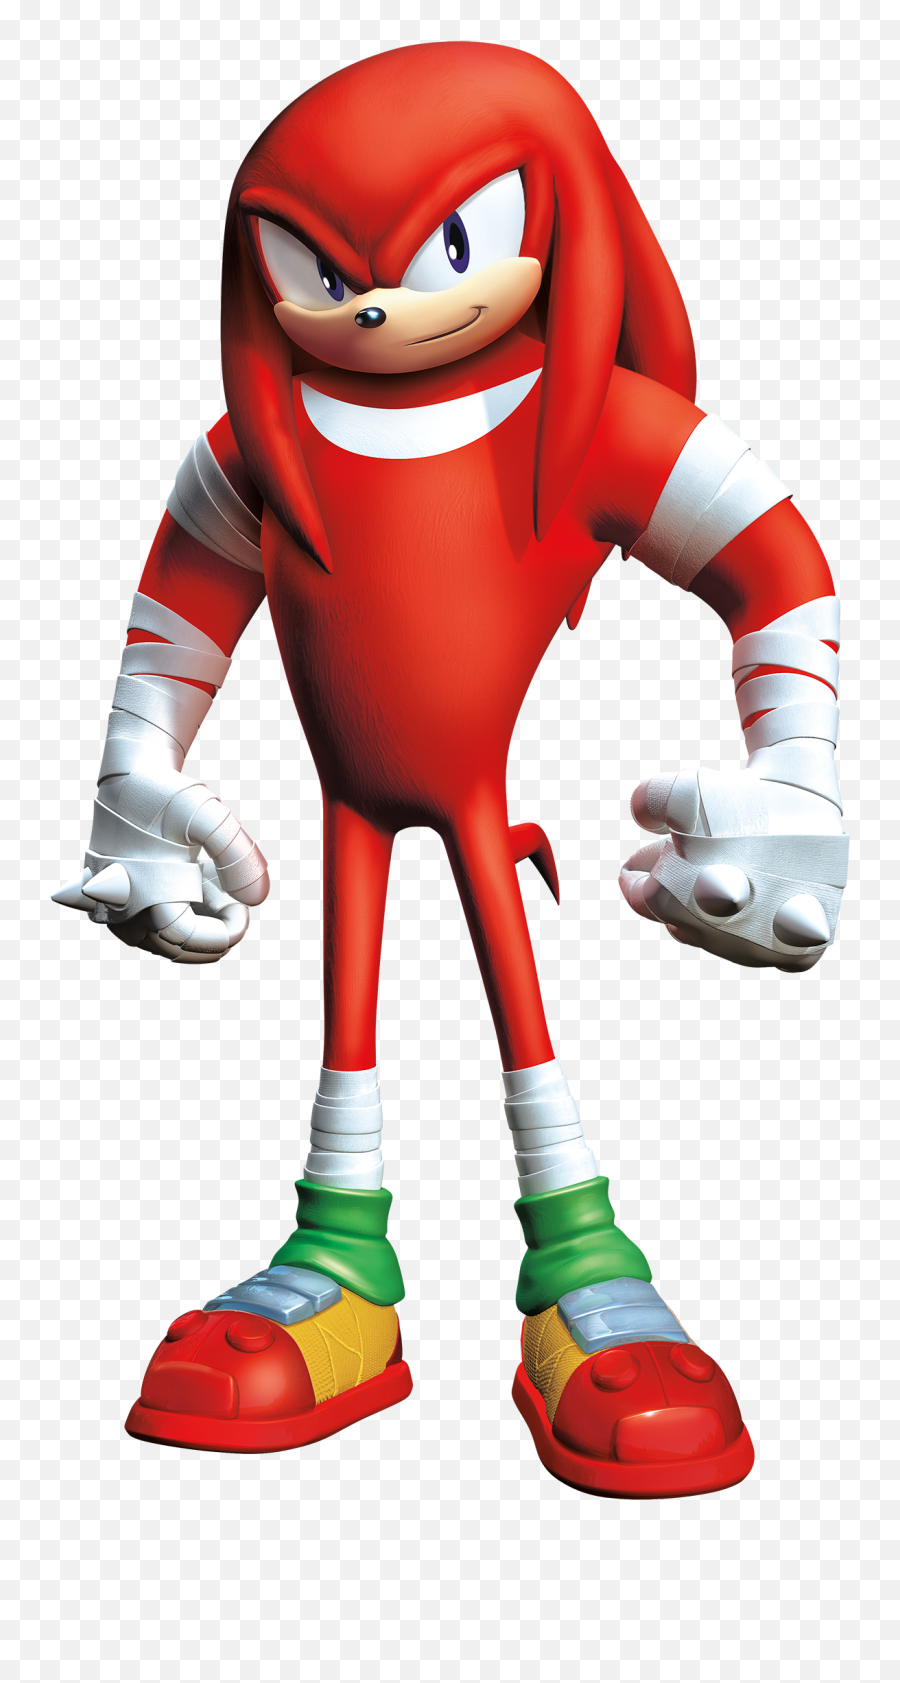 Sonic Boom Knuckles Png Image - Knuckles From Sonic The Hedgehog,Knuckles Png